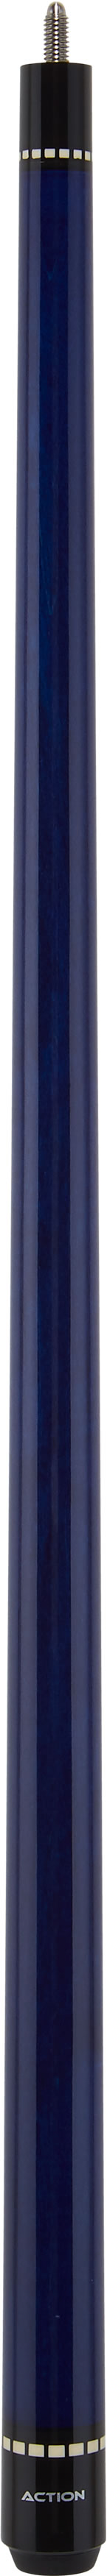 Action VAL13 Value Pool Cue Pool Cue